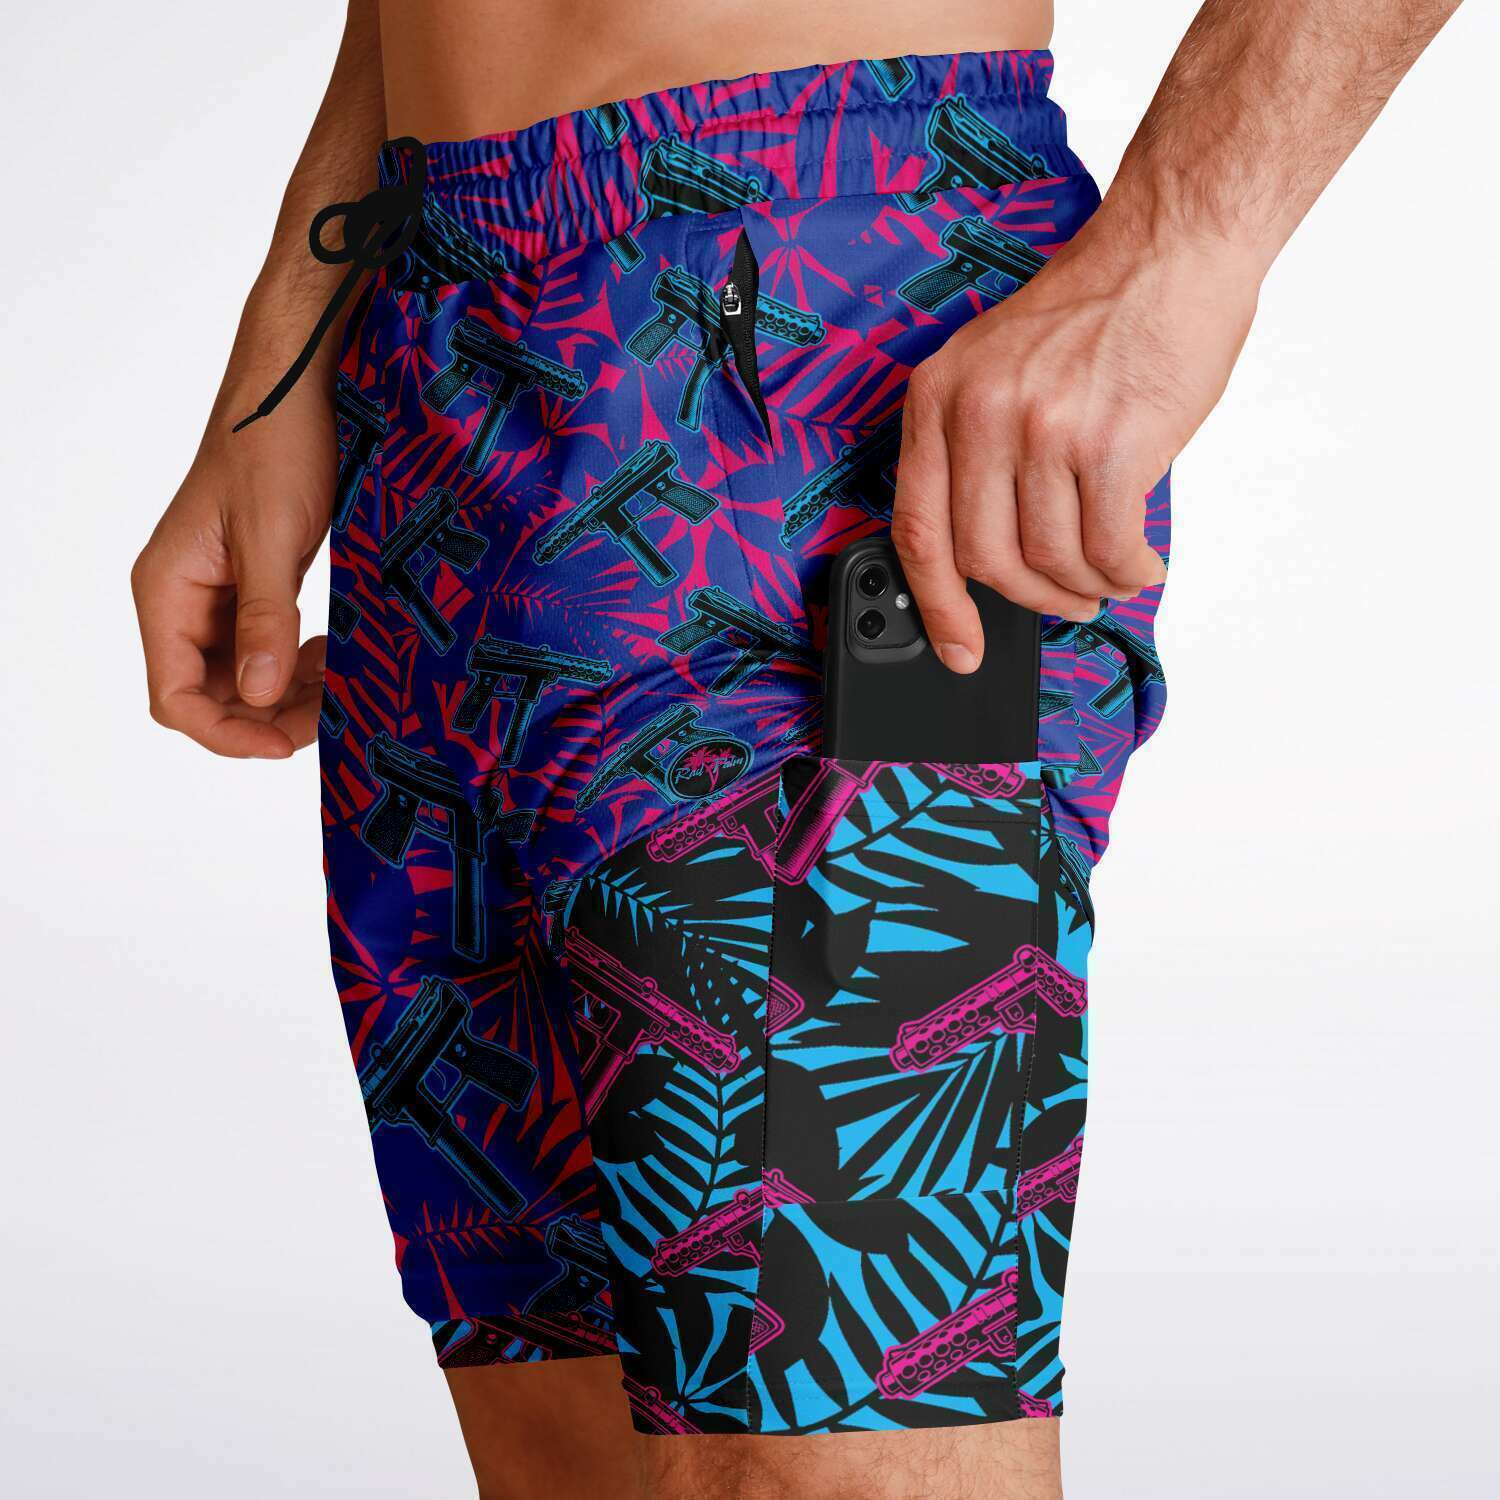 Rad Palm 9 Lives 2 in 1 Shorts